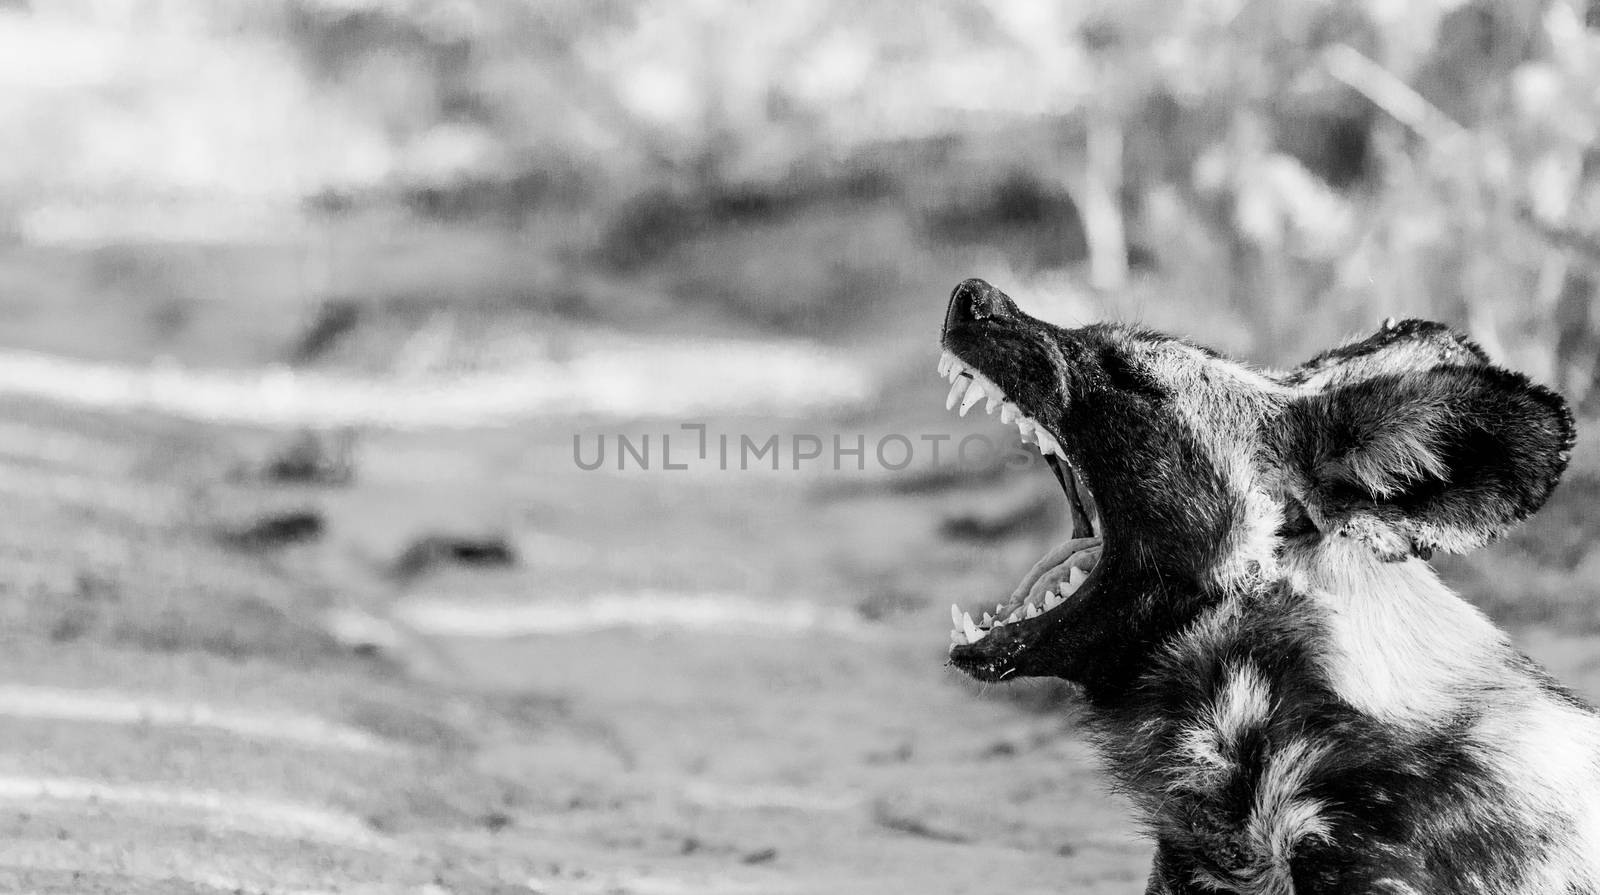 African wild dog yawning in black and white in the Kruger National Park, South Africa. by Simoneemanphotography